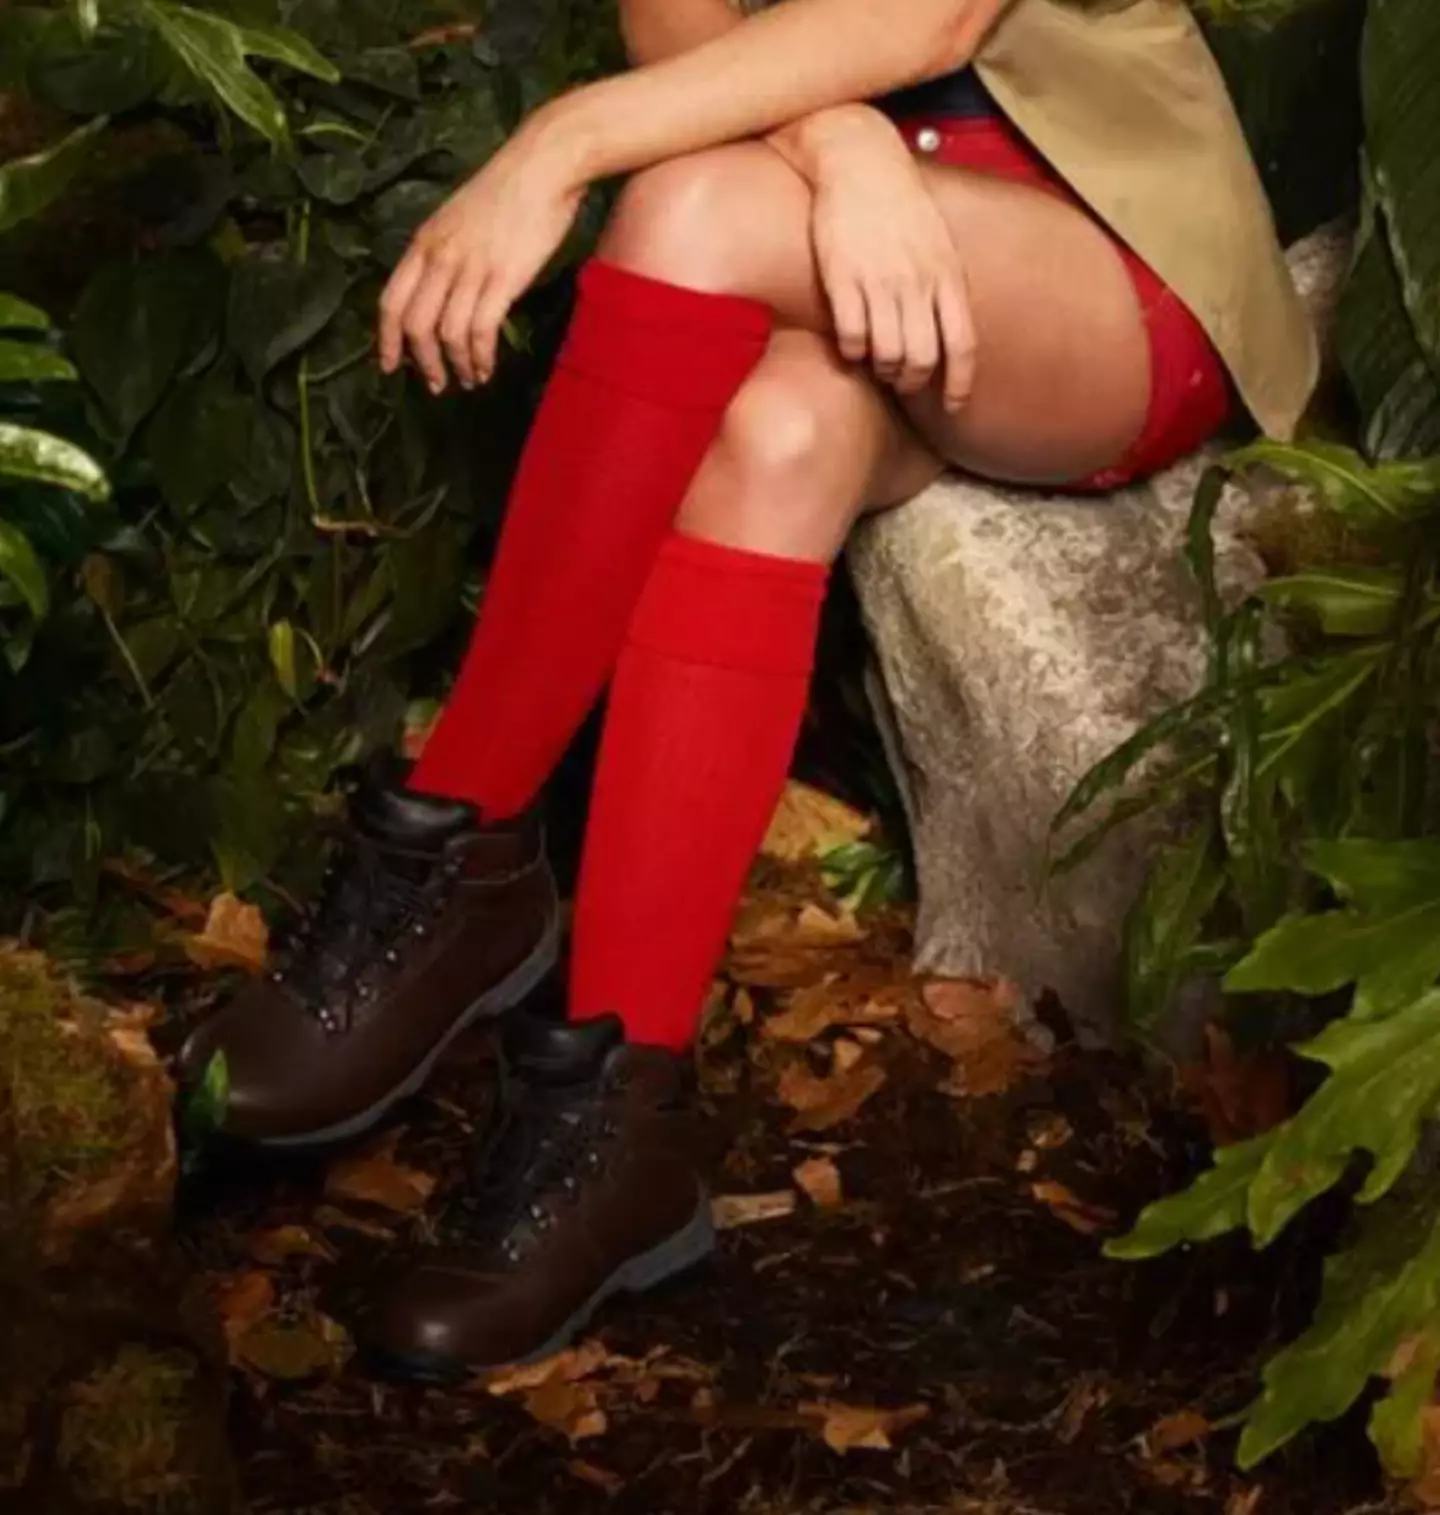 I'm A Celebrity... Get Me Out Of Here! is back in business and so are the red socks.